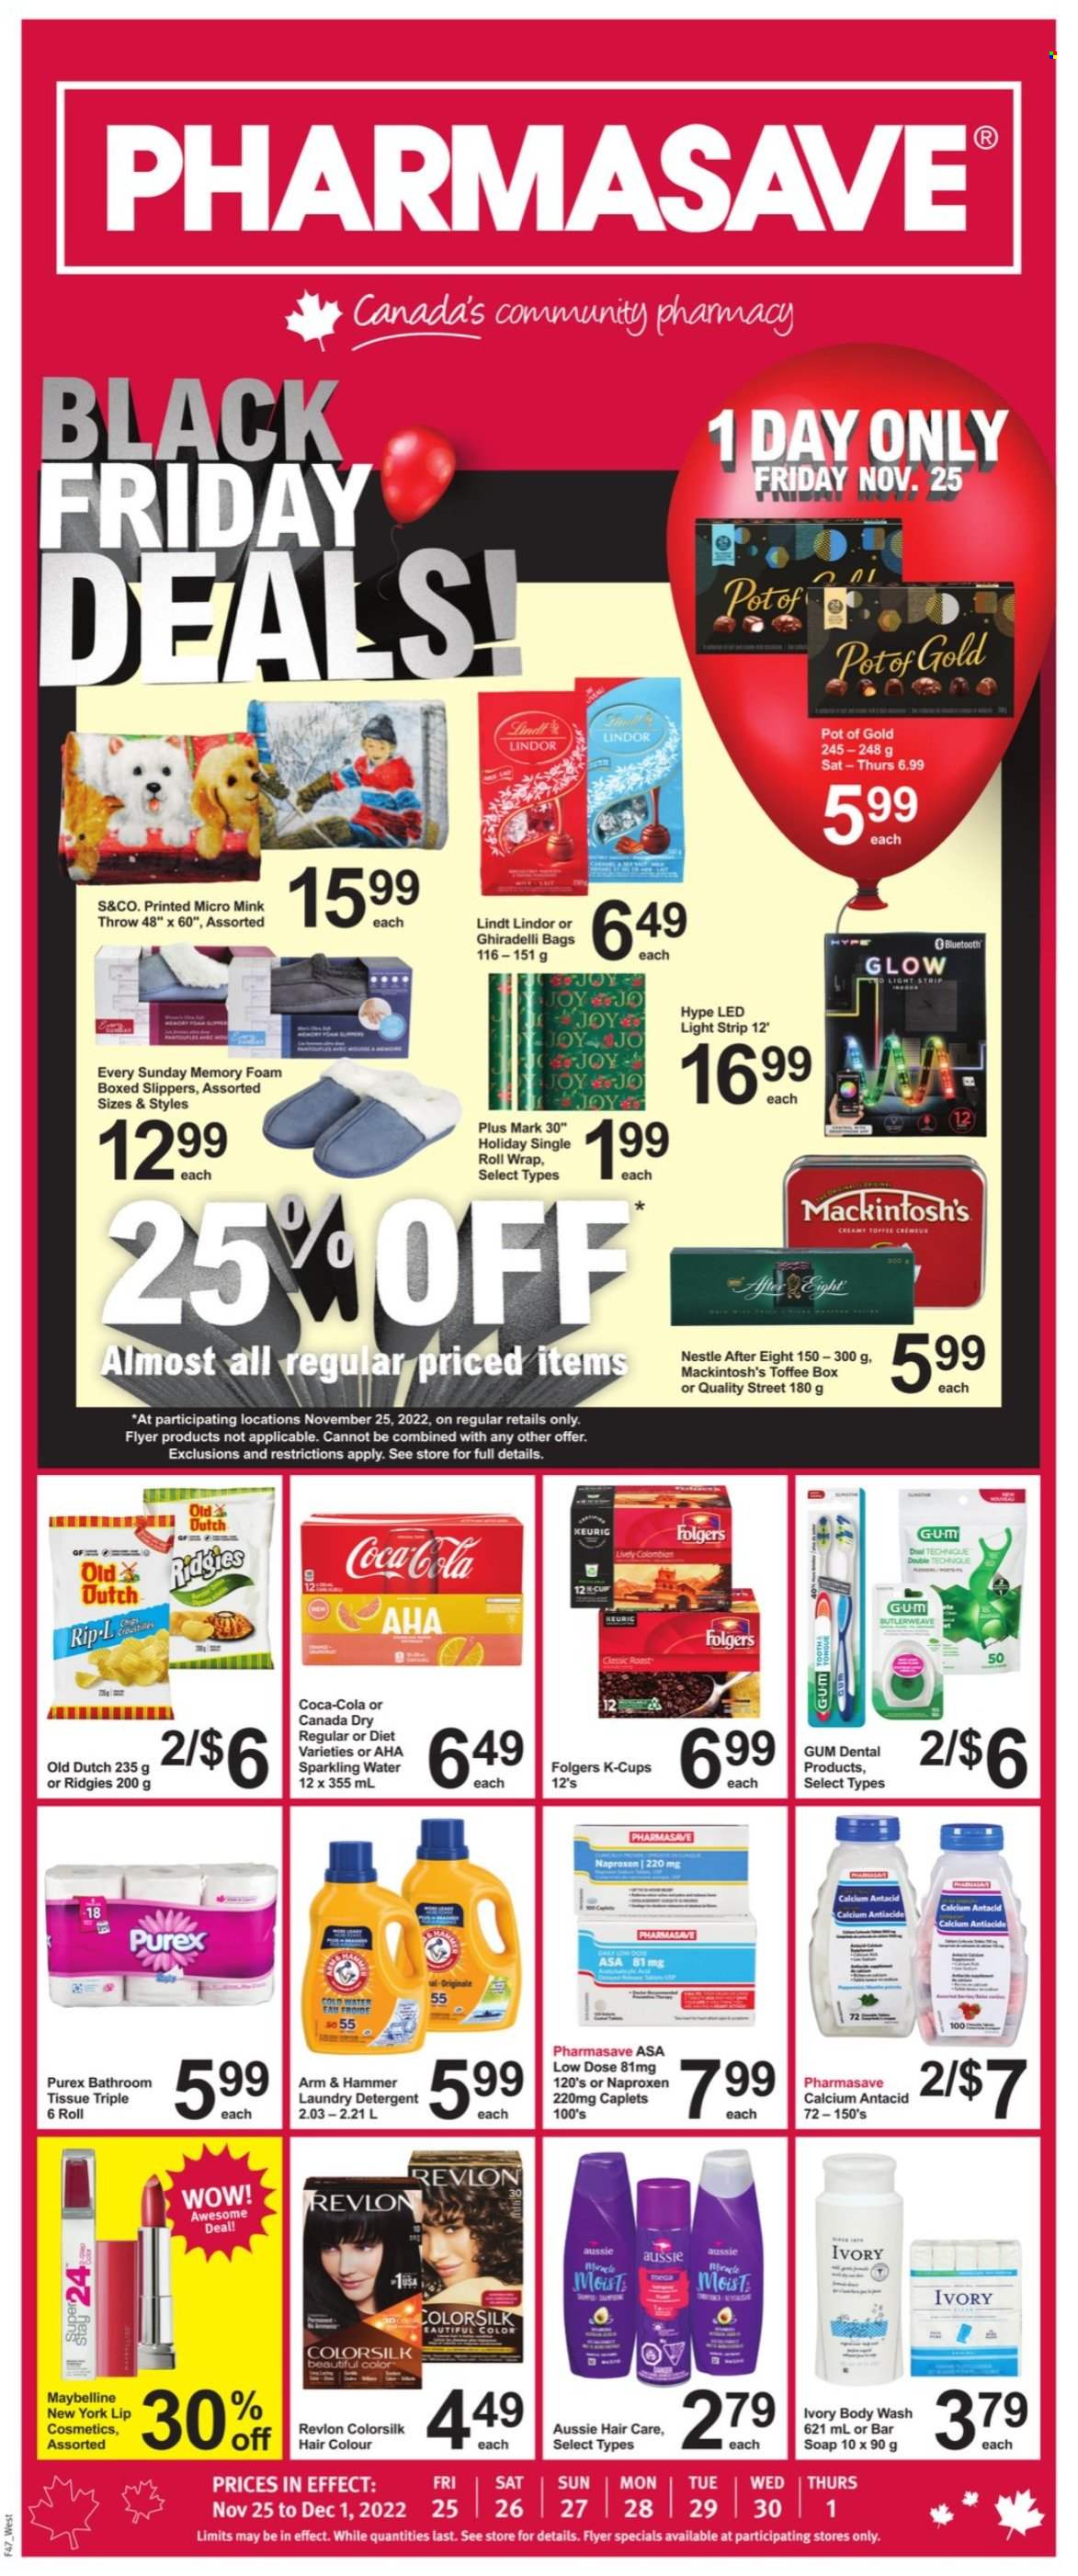 thumbnail - Pharmasave Flyer - November 25, 2022 - December 01, 2022 - Sales products - toffee, After Eight, ARM & HAMMER, Canada Dry, Coca-Cola, sparkling water, Folgers, coffee capsules, K-Cups, bath tissue, laundry detergent, Purex, Joy, body wash, soap bar, soap, Aussie, Revlon, Maybelline, pot, slippers, Antacid, Low Dose, calcium, detergent, Nestlé, Lindt, Lindor. Page 1.